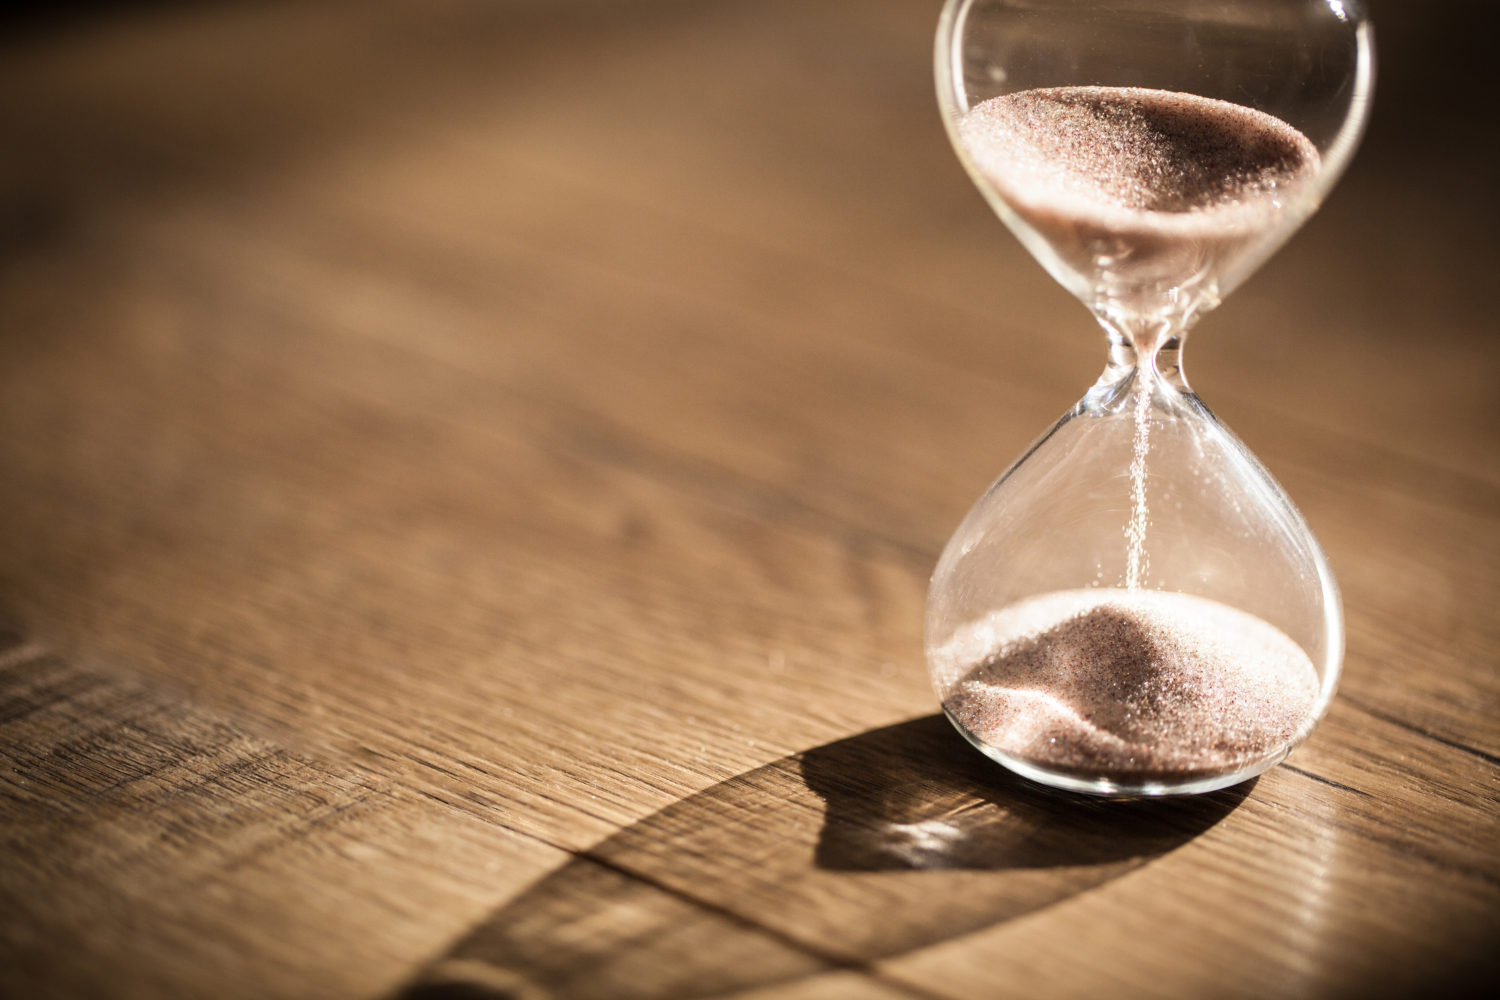 The hourglass: serving the news, serving the reader - Poynter